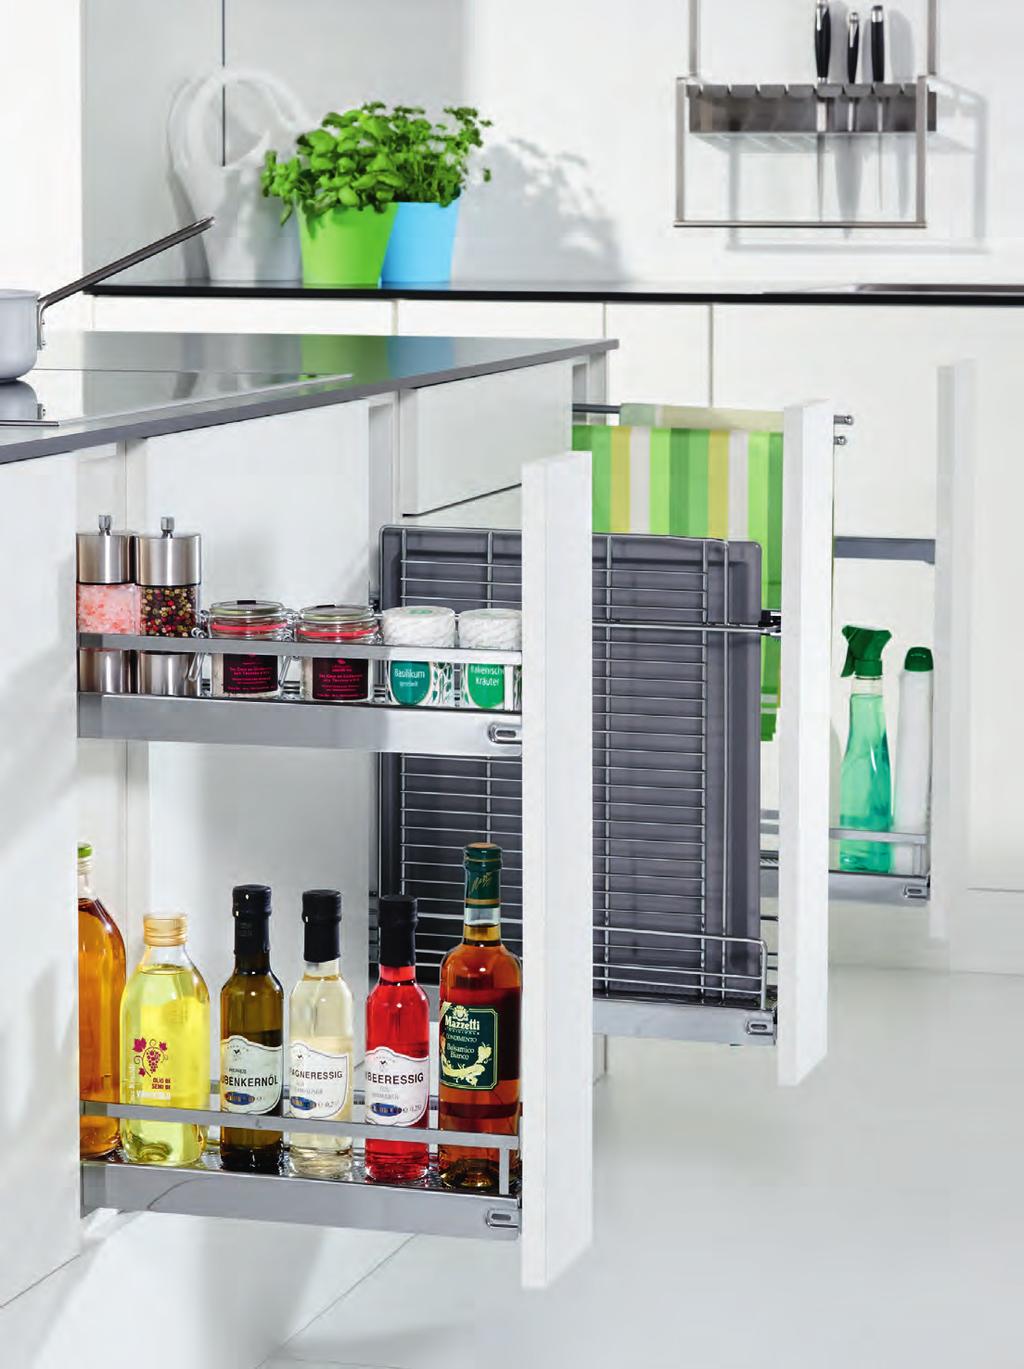 No. 15 Technical Information 15cm base unit pull-out 15cm towel-rail pull-out 15cm shelf and baking tray pull-out 15cm